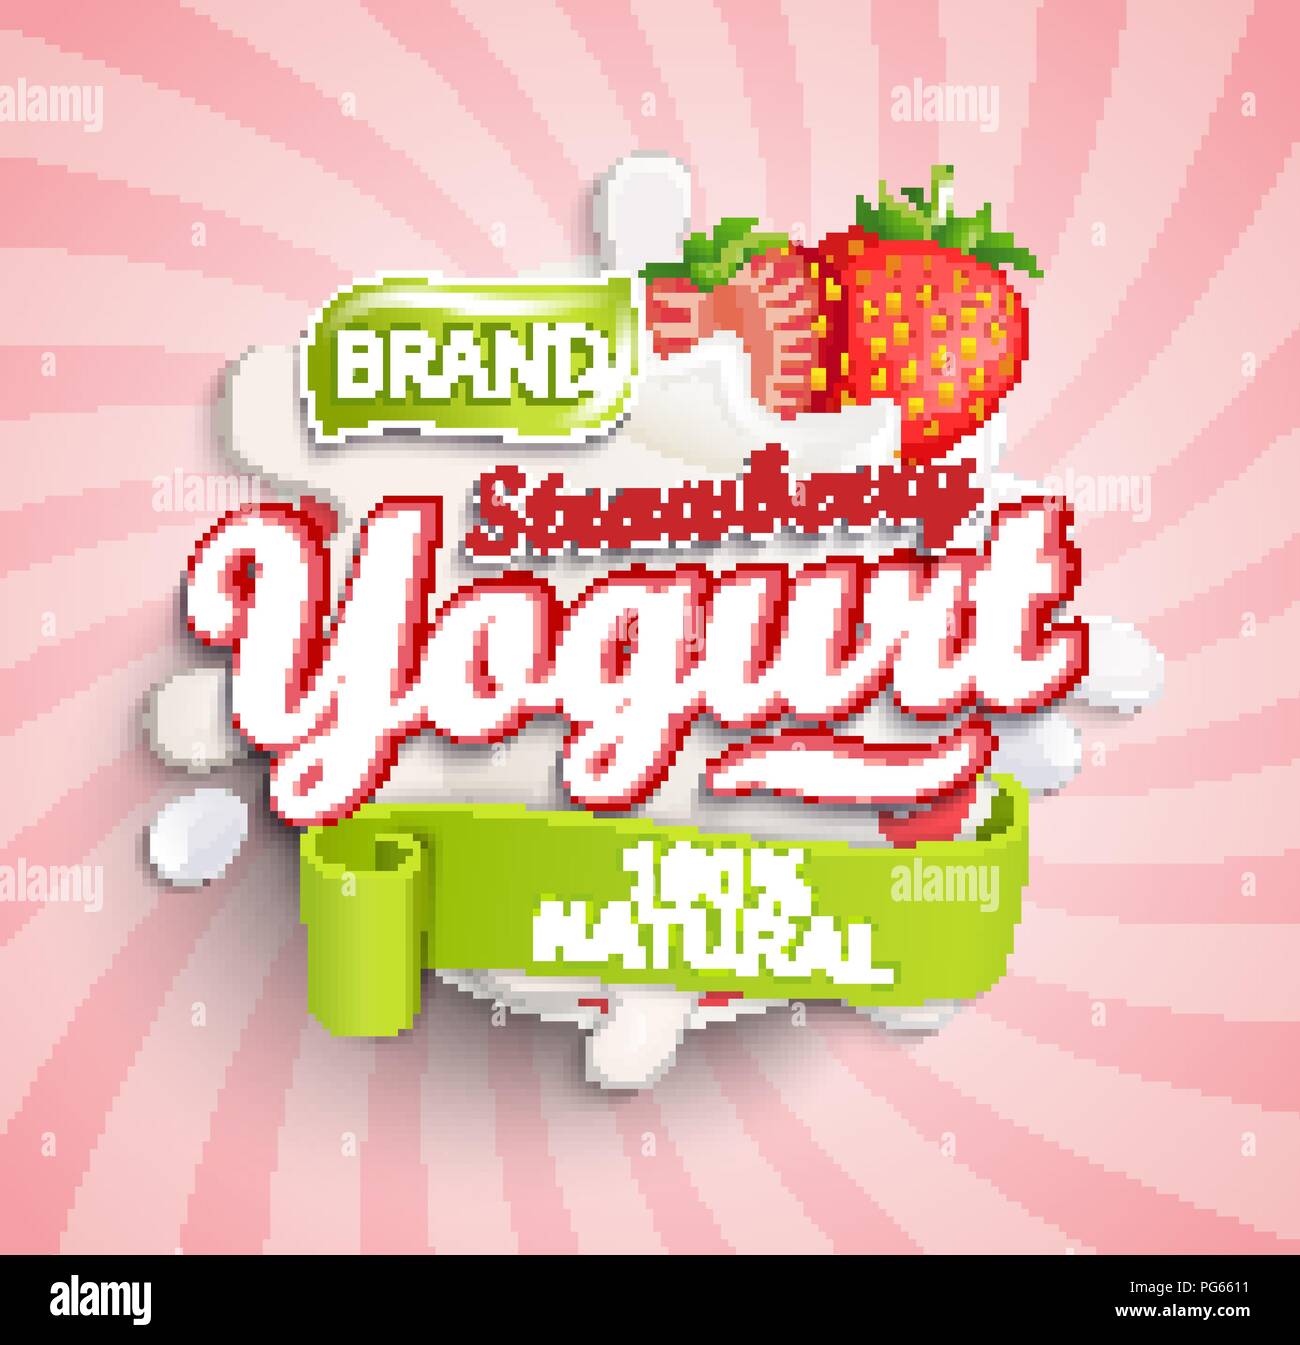 Natural and fresh strawberry Yogurt label splash on sunburst background for your brand, logo, template, label, emblem for groceries, agriculture stores, packaging and advertising. Vector illustration. Stock Vector